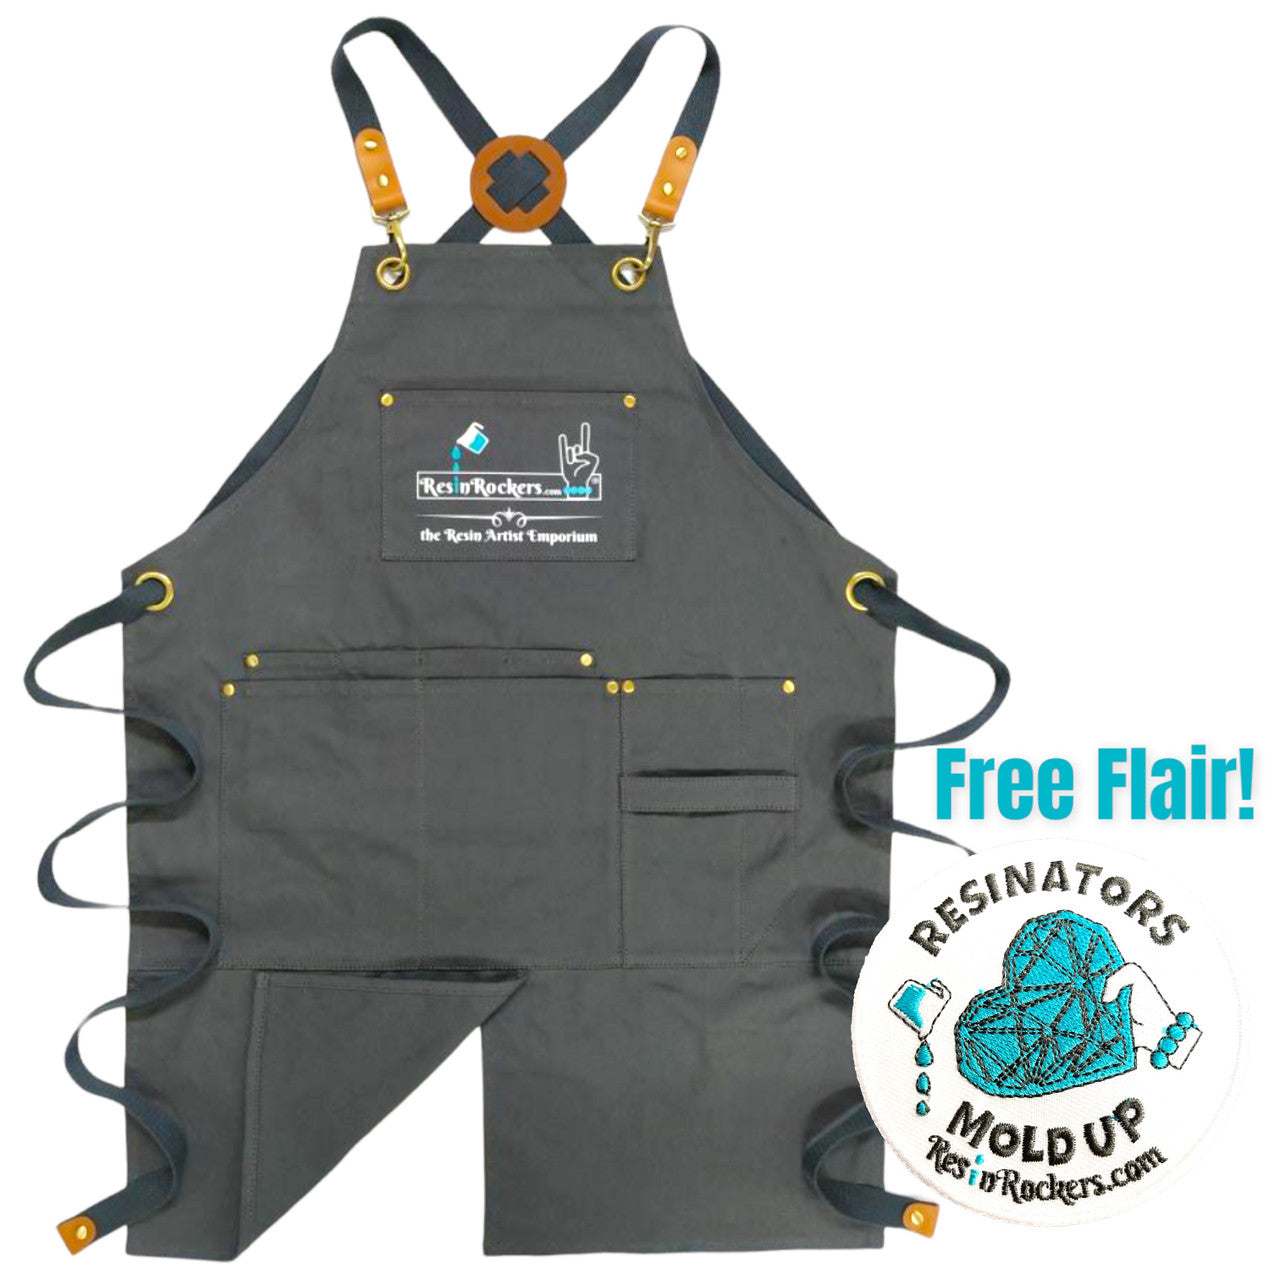 Exclusive Resin Rockers Heavy Duty Canvas Apron with Pockets and FLAIR Designed for Epoxy and UV Resin Art